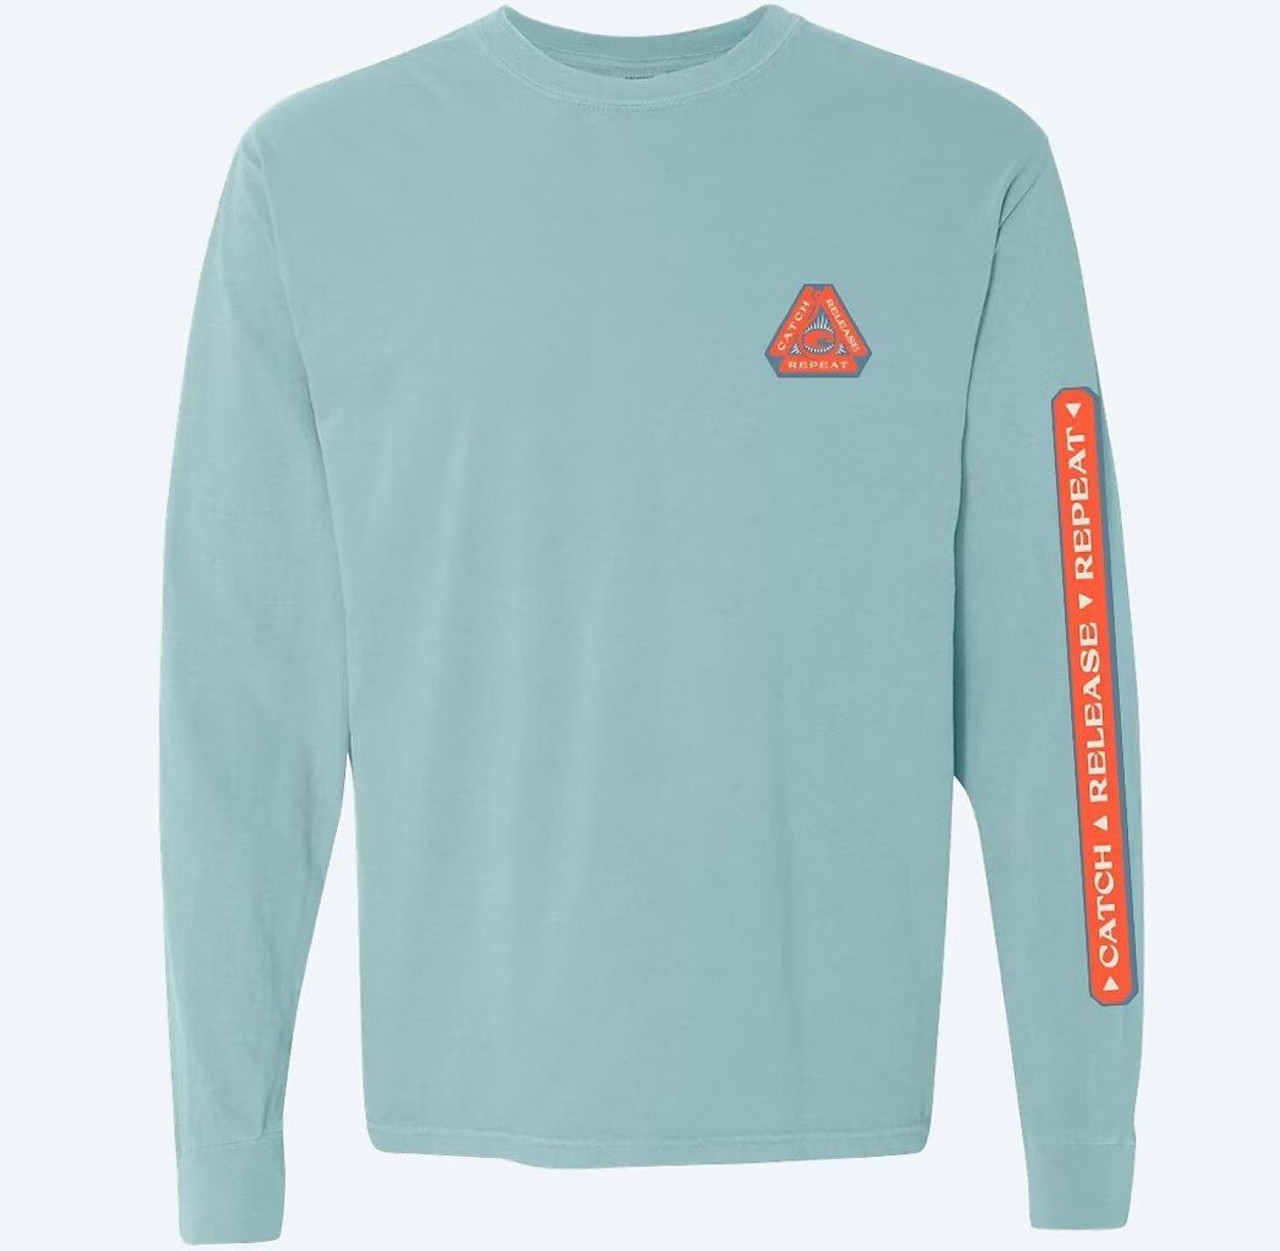 Costa Del Mar CRR Crest Long Sleeve 100% Cotton - Chalky Mint - X-Large